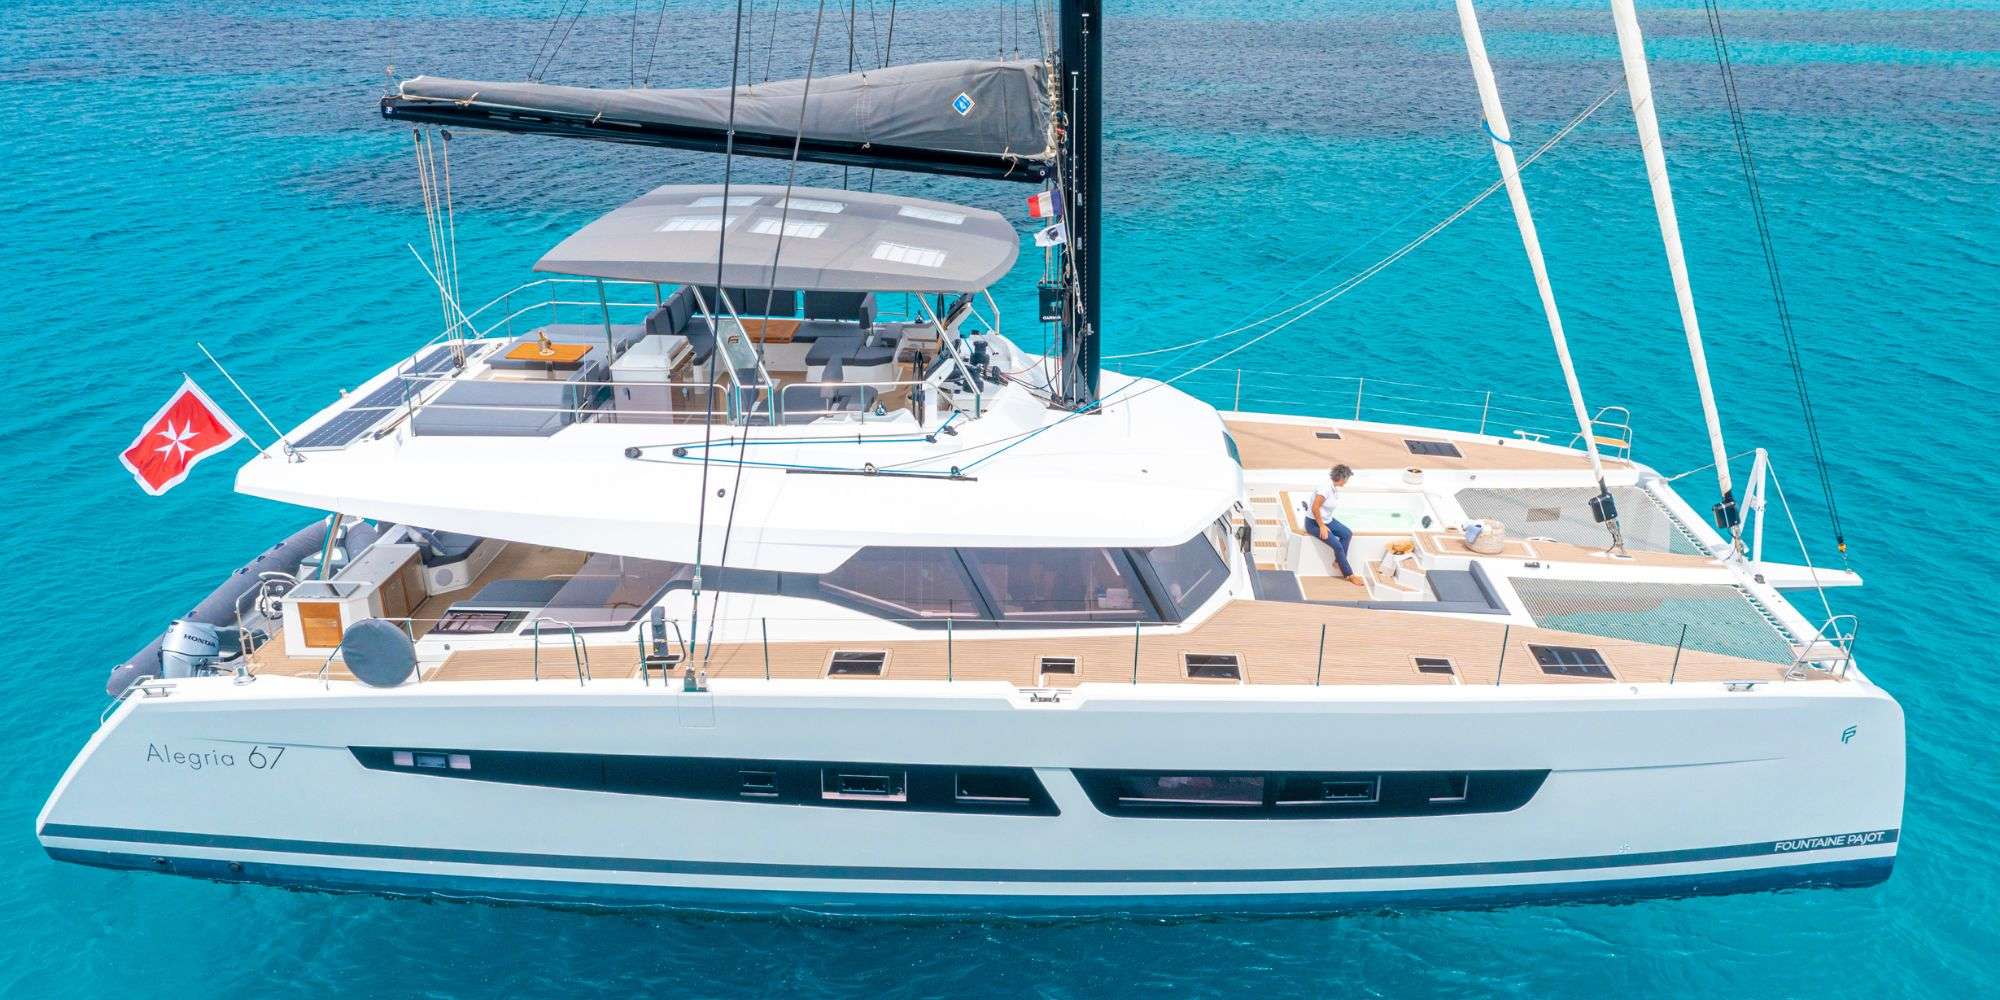 SEMPER FIDELIS - Luxury yacht charter Antigua and Barbuda & Boat hire in Bahamas & Caribbean 1